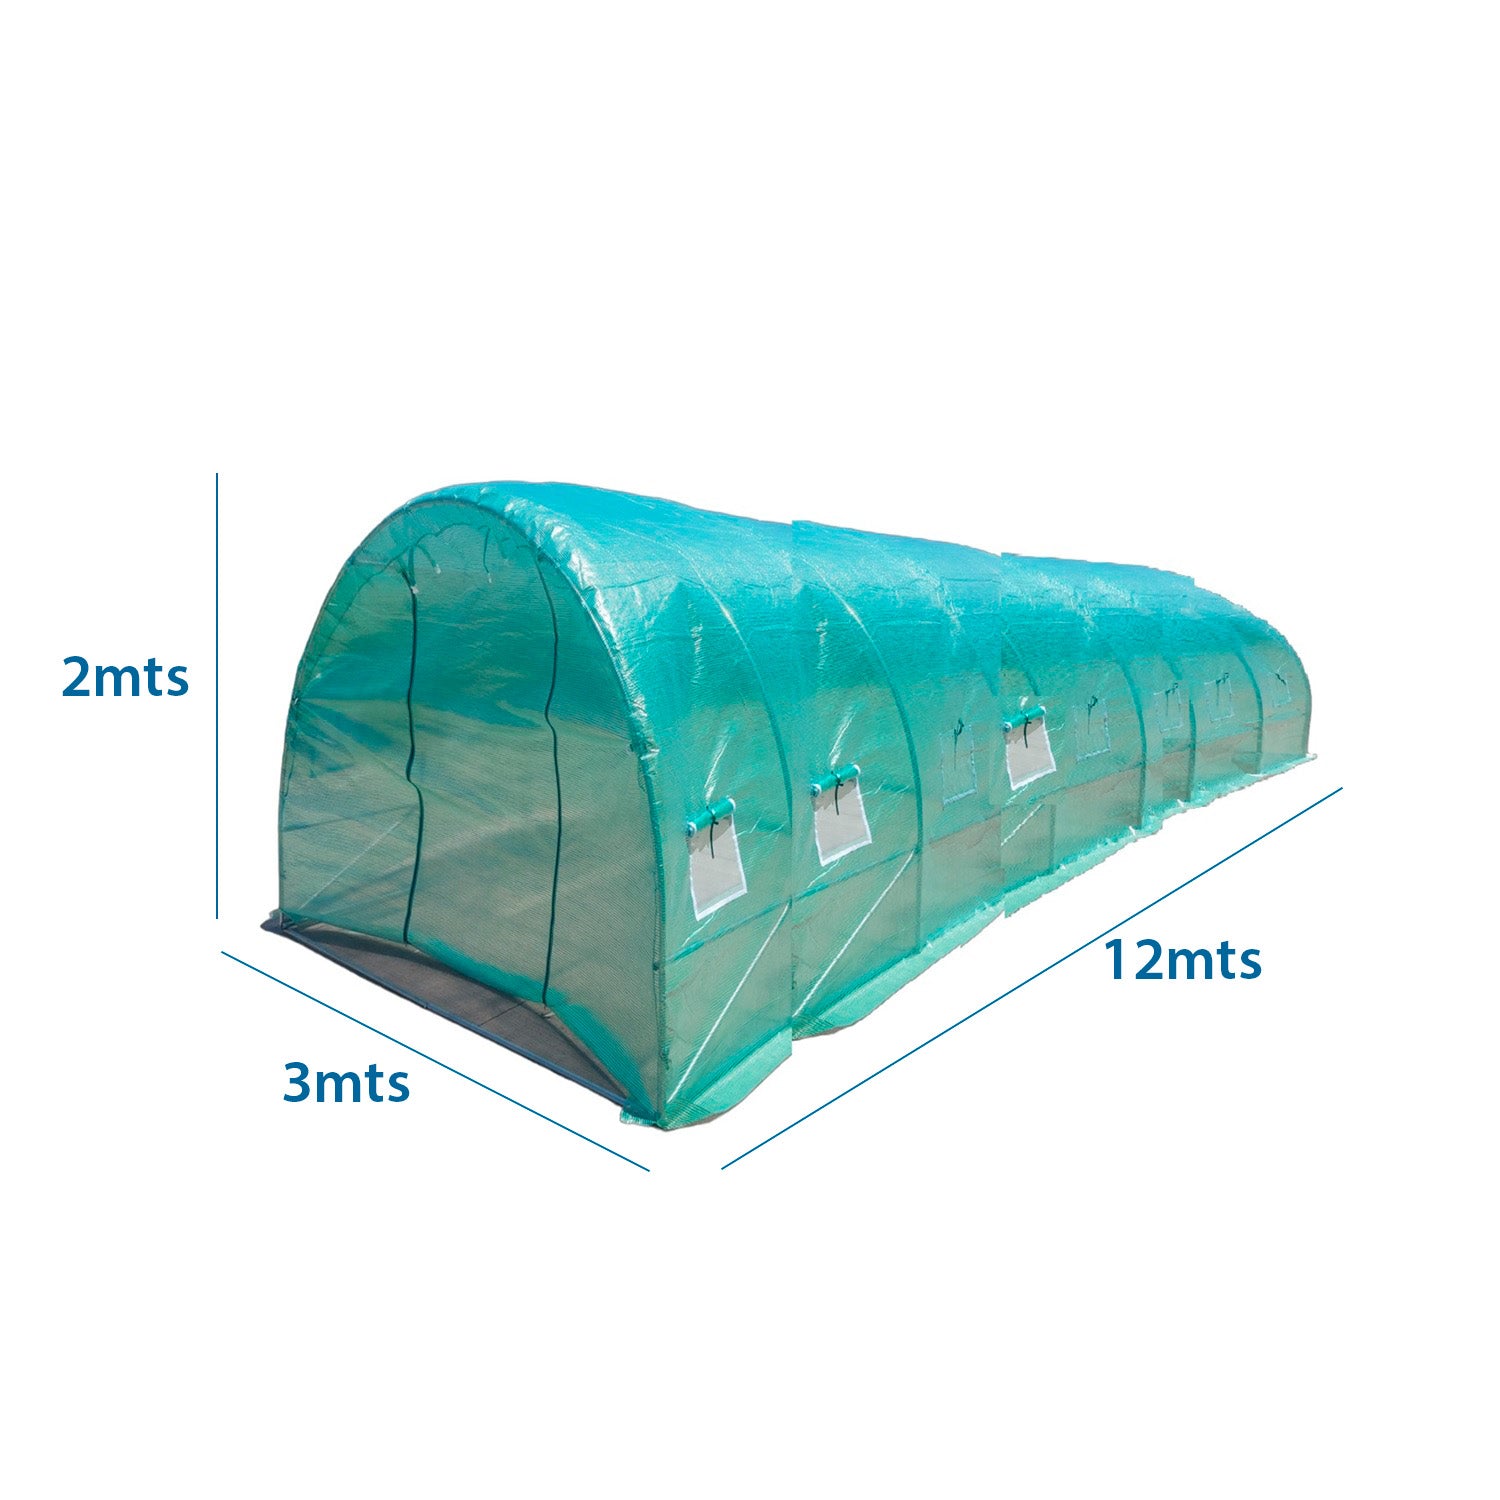 INVERNADERO ARMABLE TUNEL 36m² 12x3x2mts